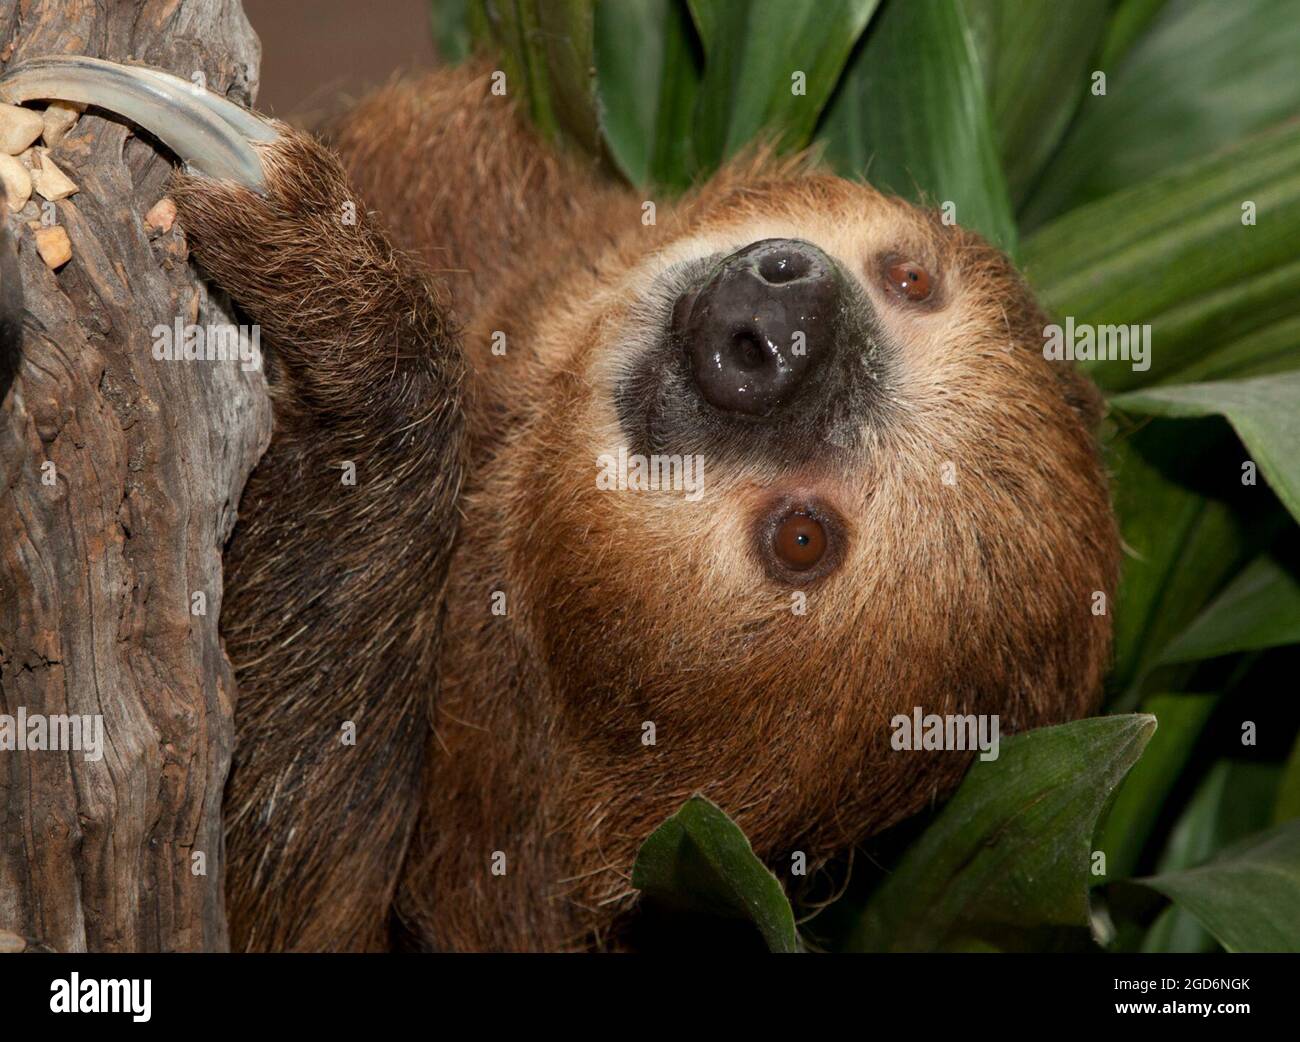 Closeup of Linnaeus's Two-Toed Sloth (Choloepus didactylus) o Southern Two-Toed Sloth in a Tree, Smithsonian National Zoological Park, Washington, DC, USA Foto Stock